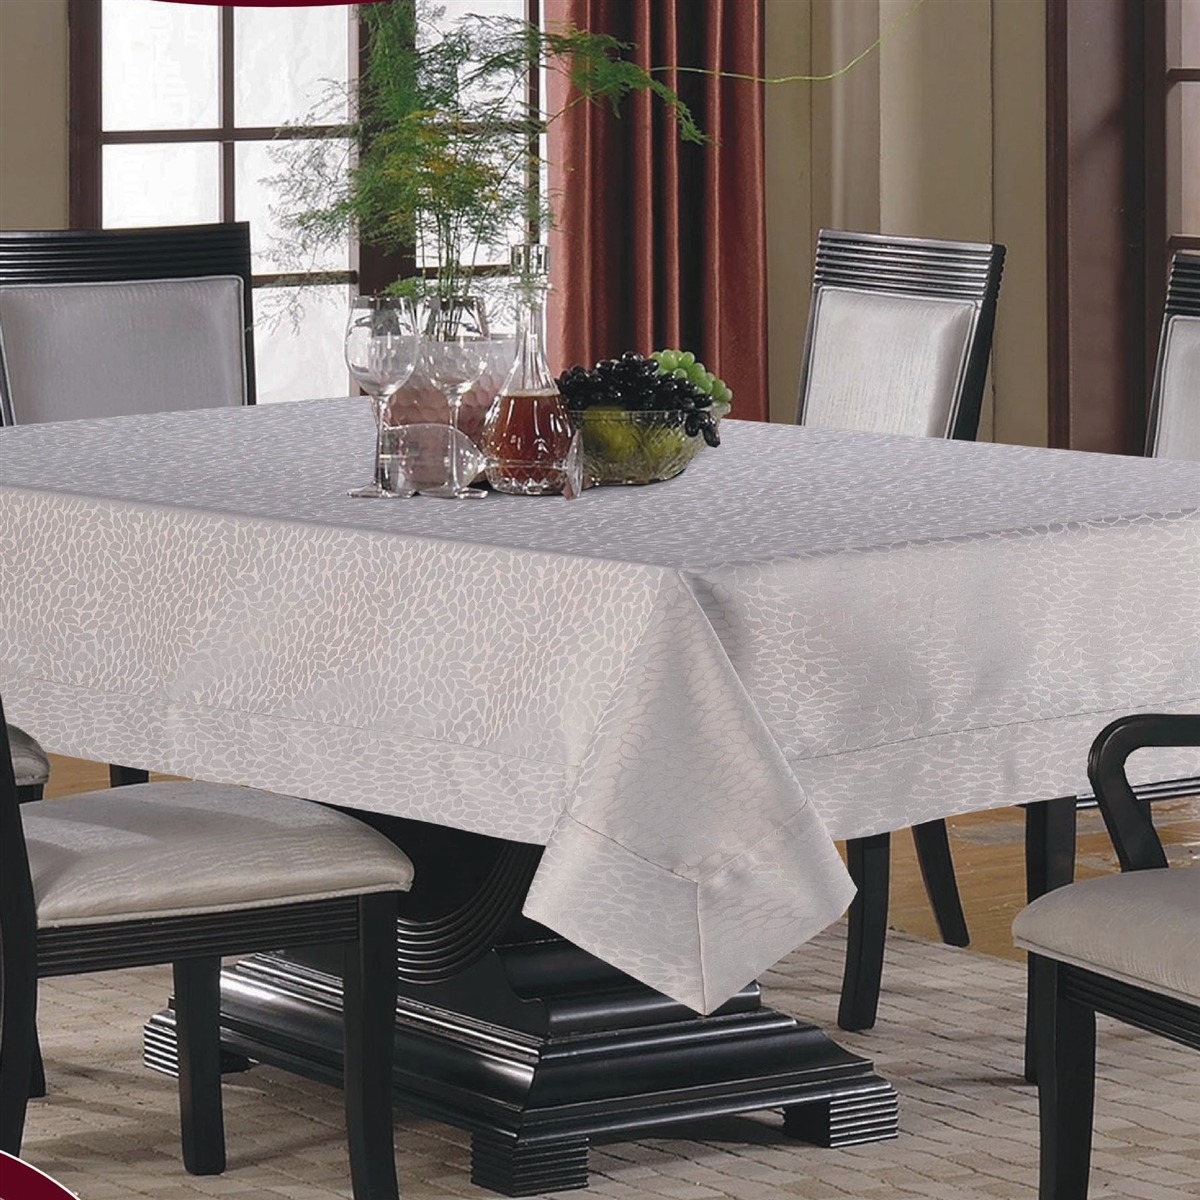 Belair Spill Proof Tablecloth | Discounts on Luxury Tablecloths